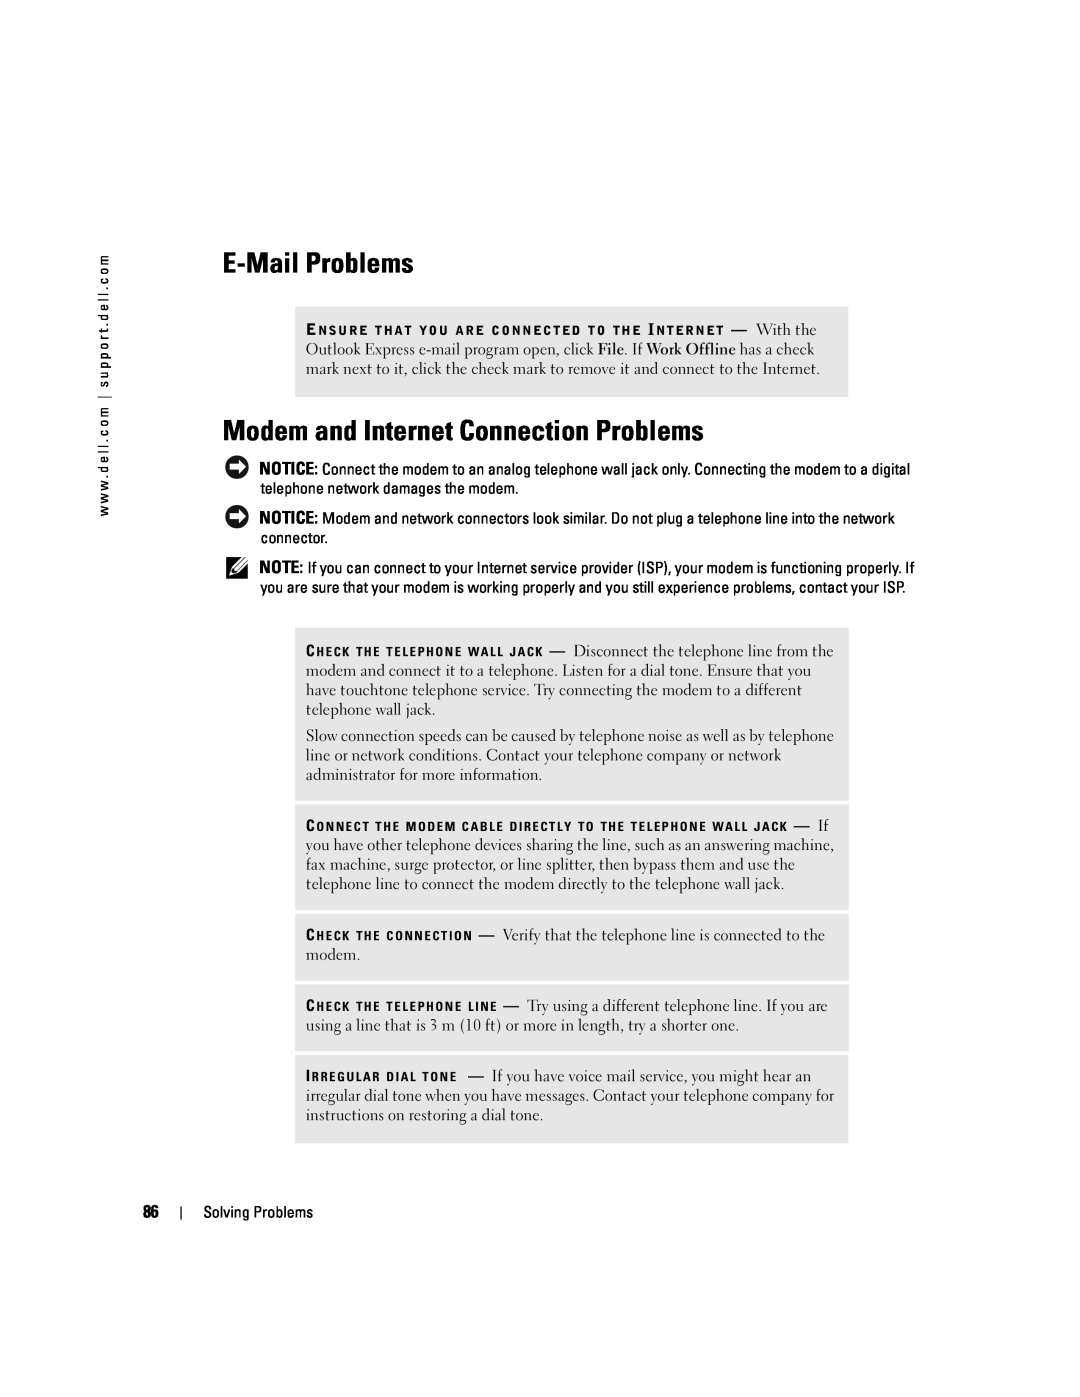 Dell PP09L owner manual E-Mail Problems, Modem and Internet Connection Problems 